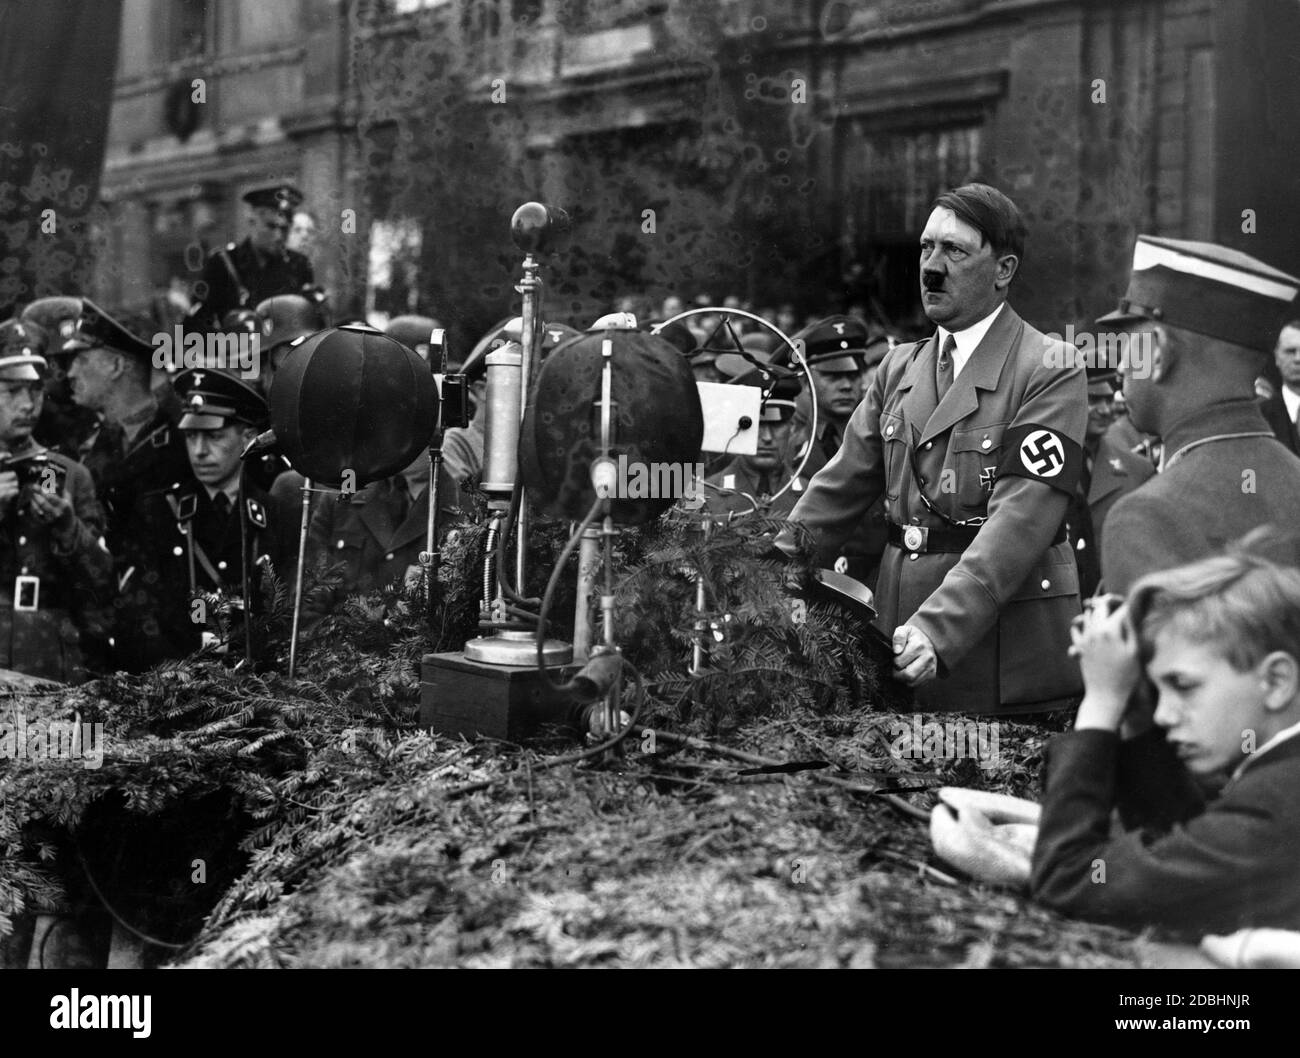 The National Socialist propaganda image shows Adolf Hitler during his speech to the German youth during the rally in Berlin's Lustgarten on May 1, 1934, the national holiday of the German people. Photo: Collection Berliner Verlag Archiv / Sennecke Stock Photo